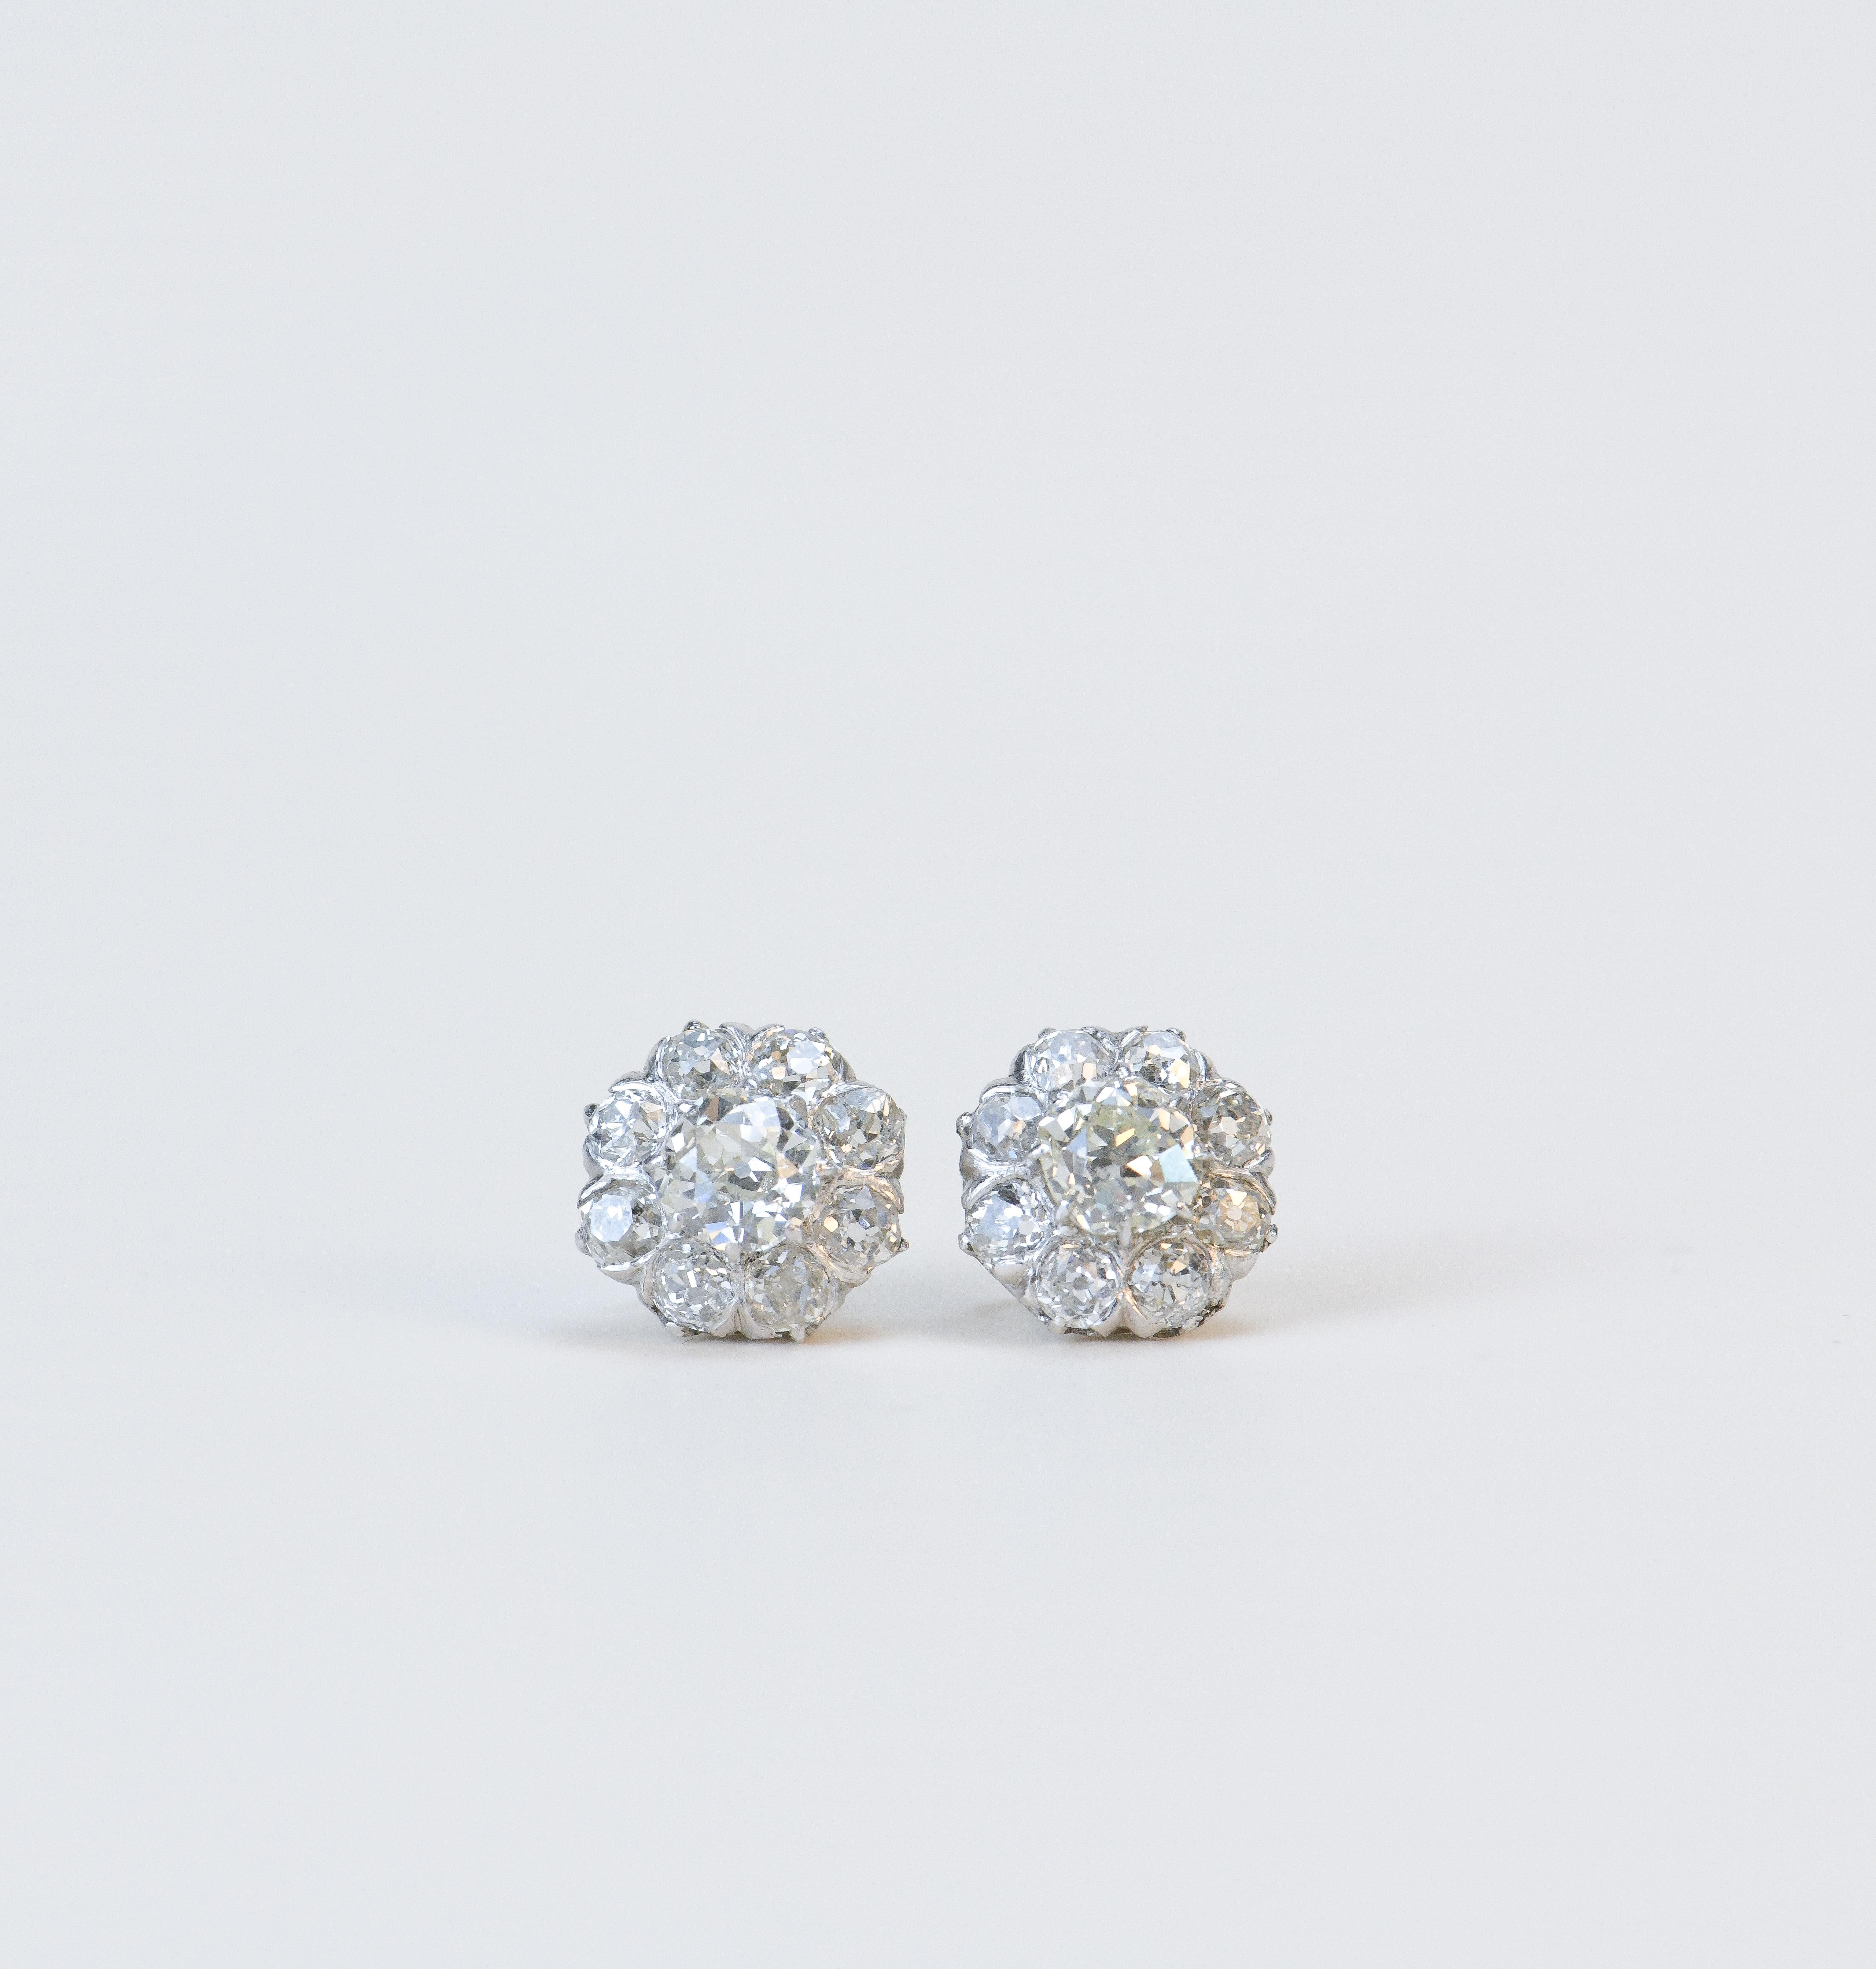 Victorian Diamonds Platinum Stud Earrings In Excellent Condition For Sale In Banbury, GB